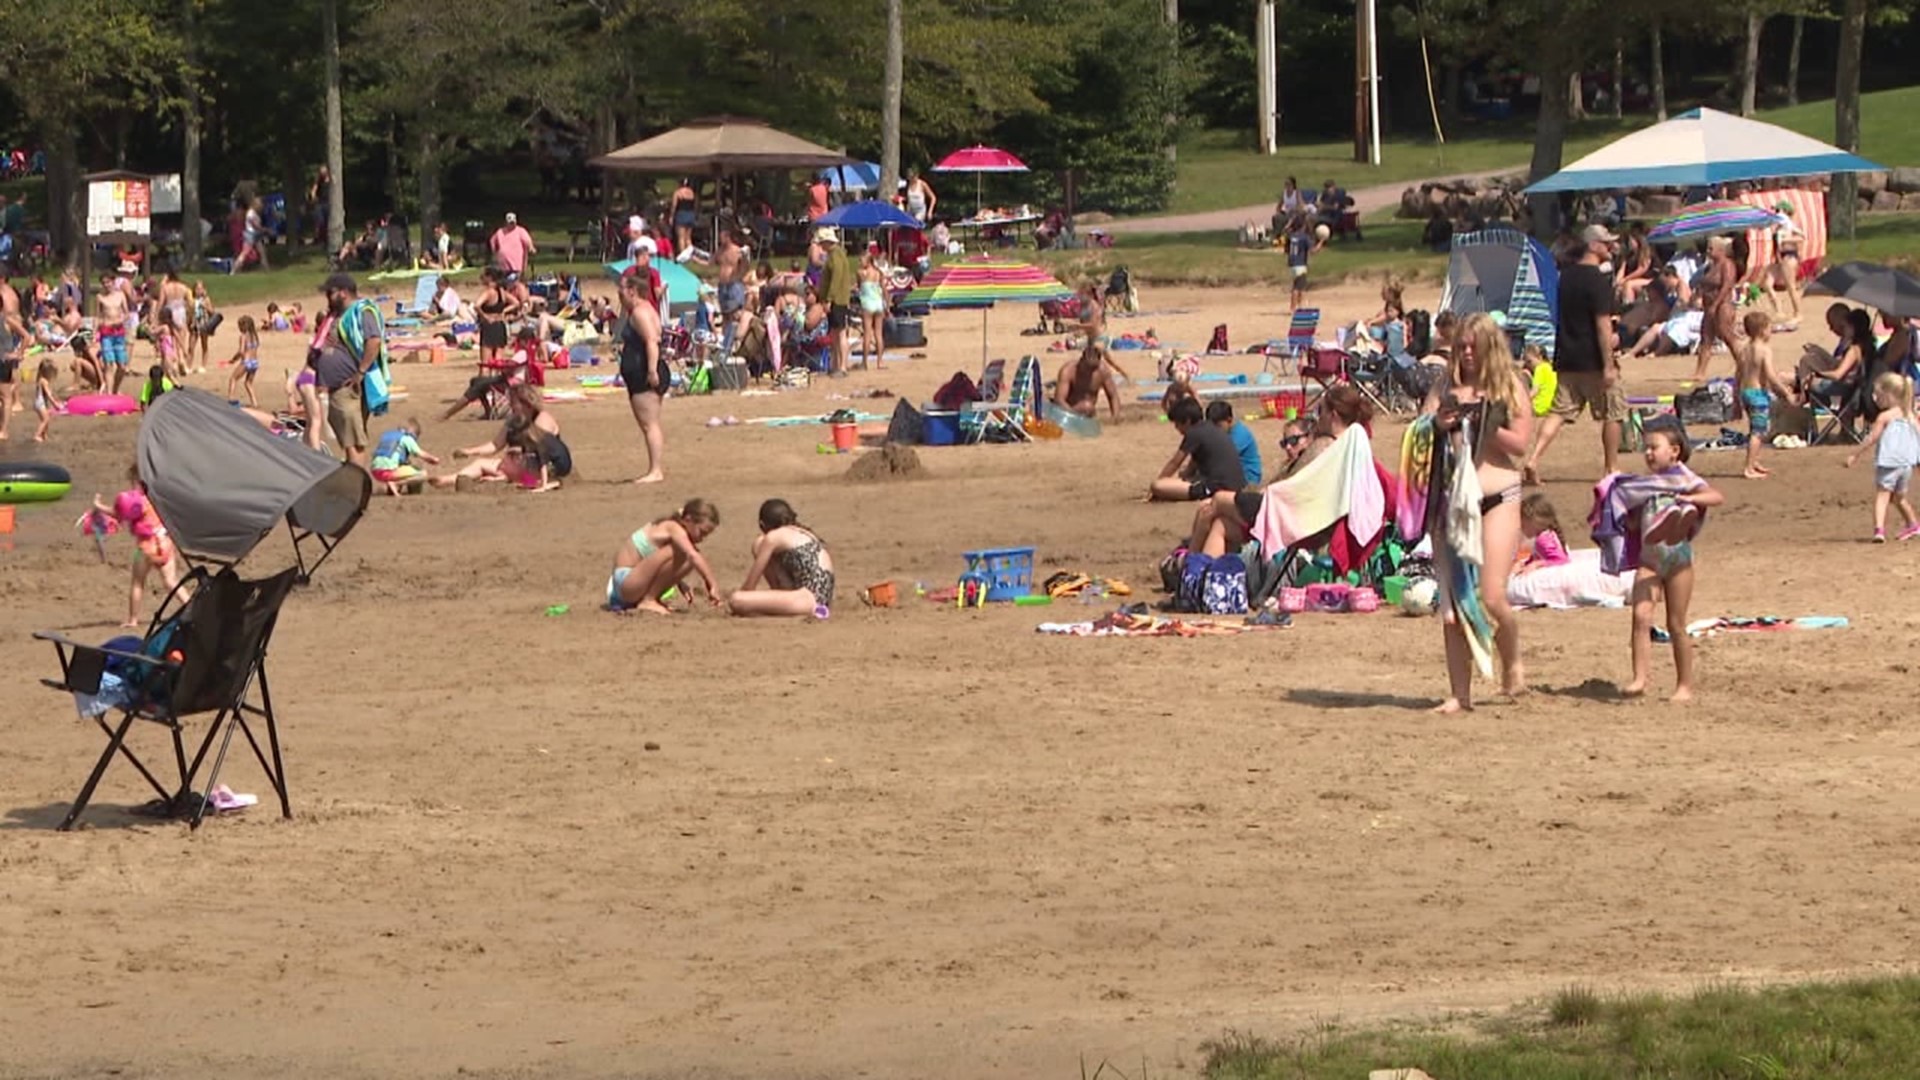 People enjoyed the holiday weekend soaking up the sun at Ricketts Glen State Park Sunday.